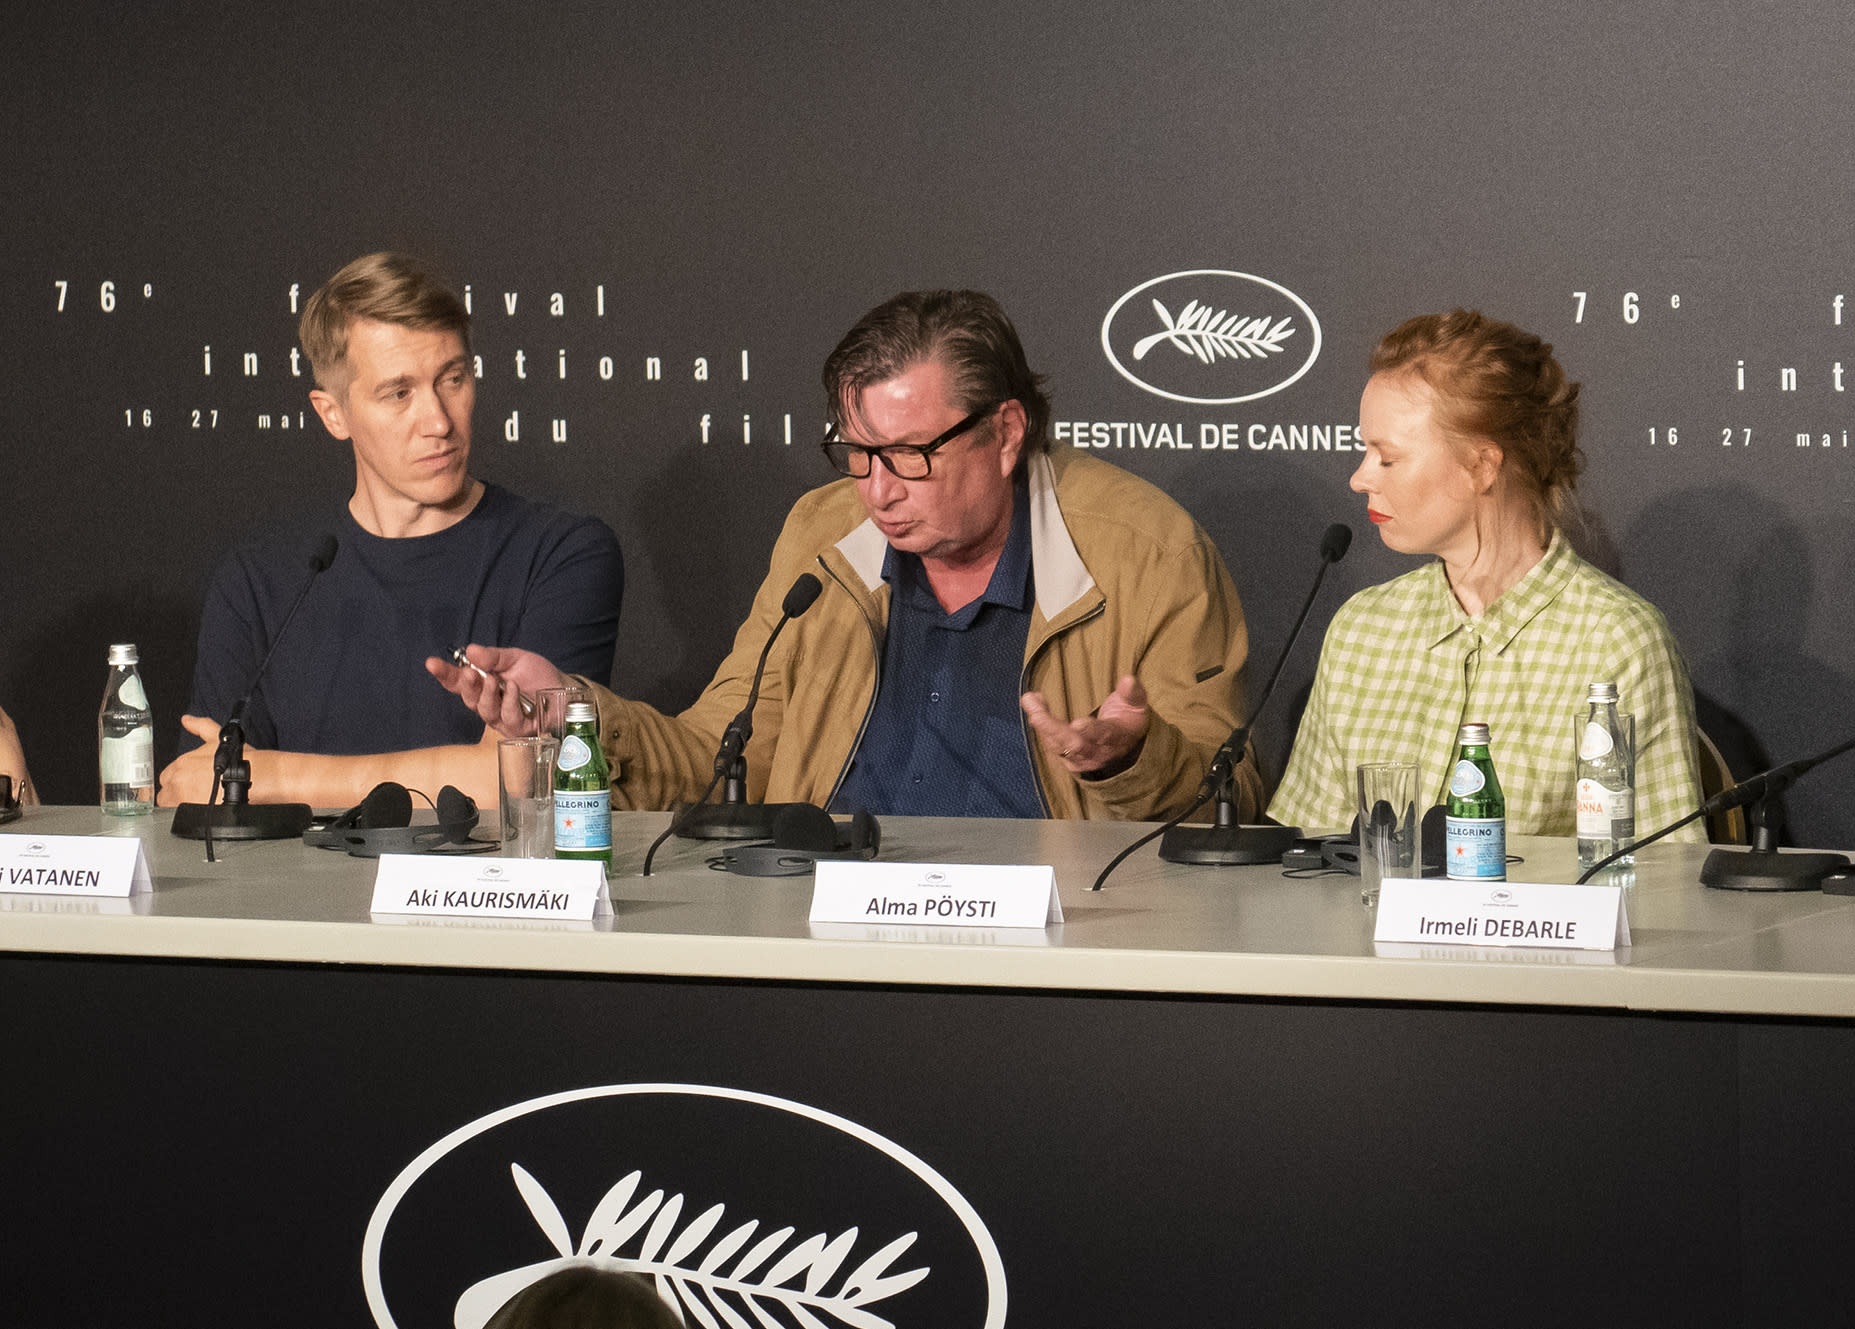 The stars of Kaurismäki’s fallen leaves: "No pressure" over potential Cannes awards